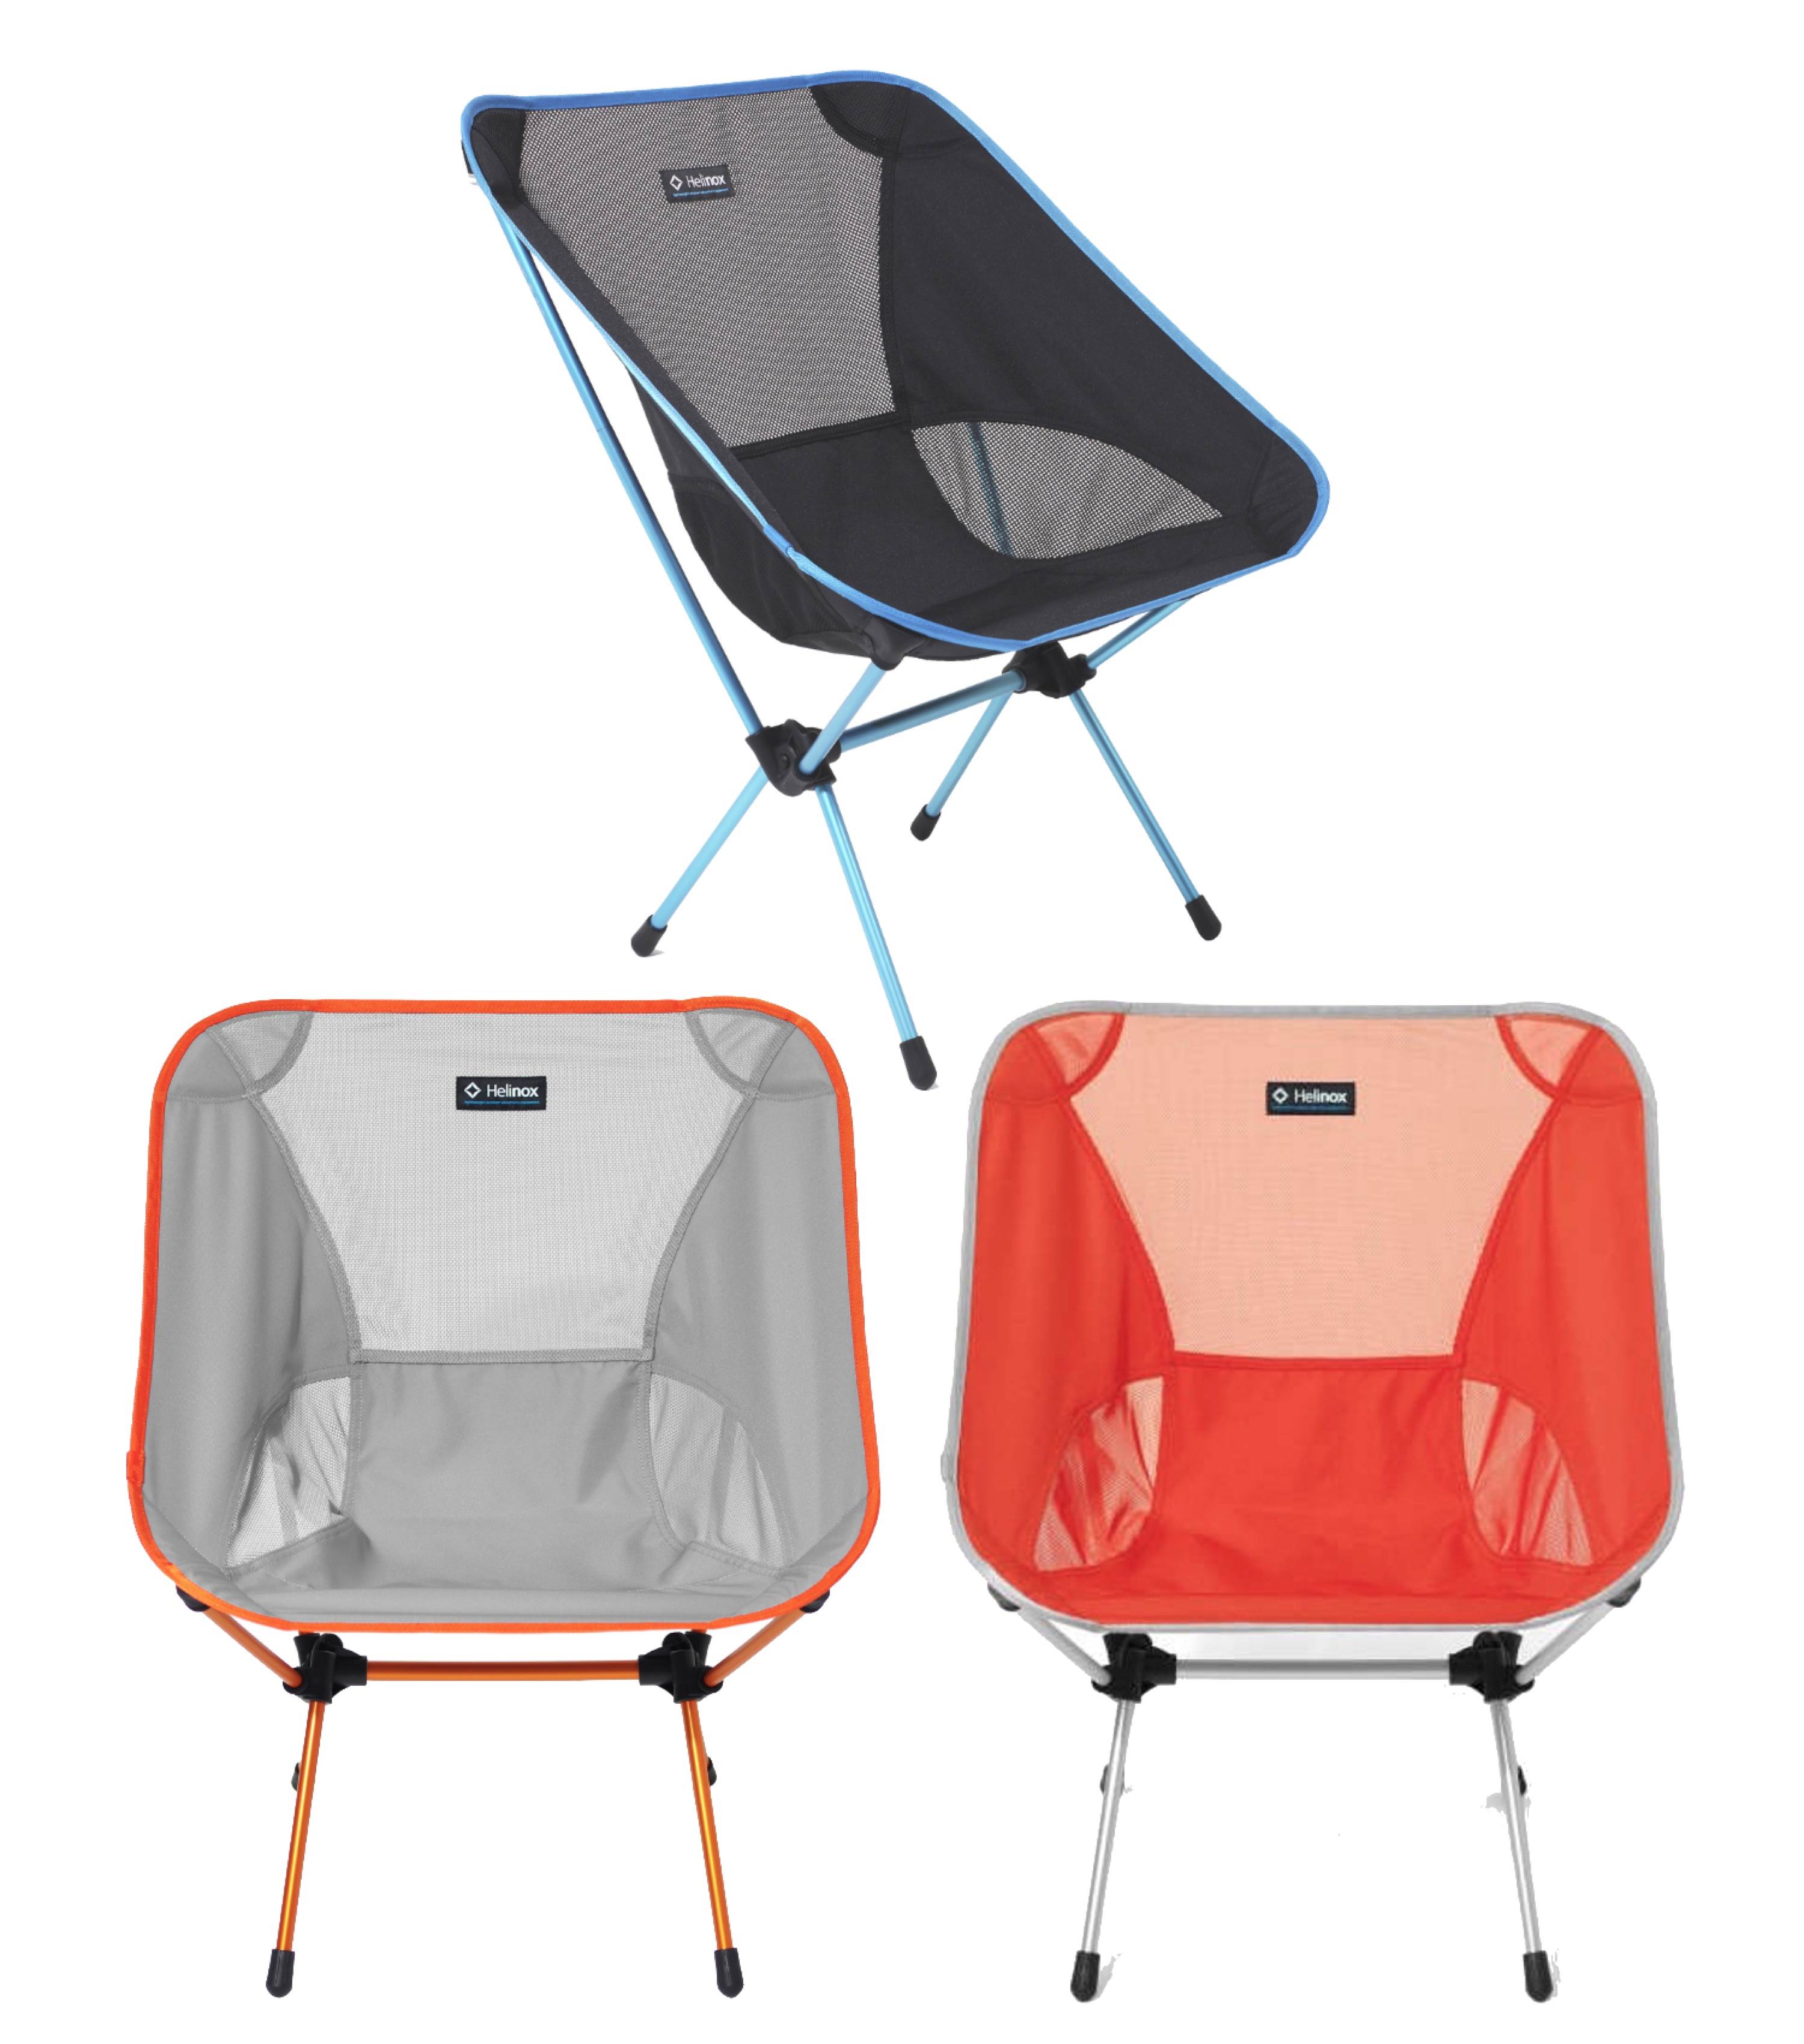 Collapsible Camping Chair Portable Helinox Chair One XL Lightweight 